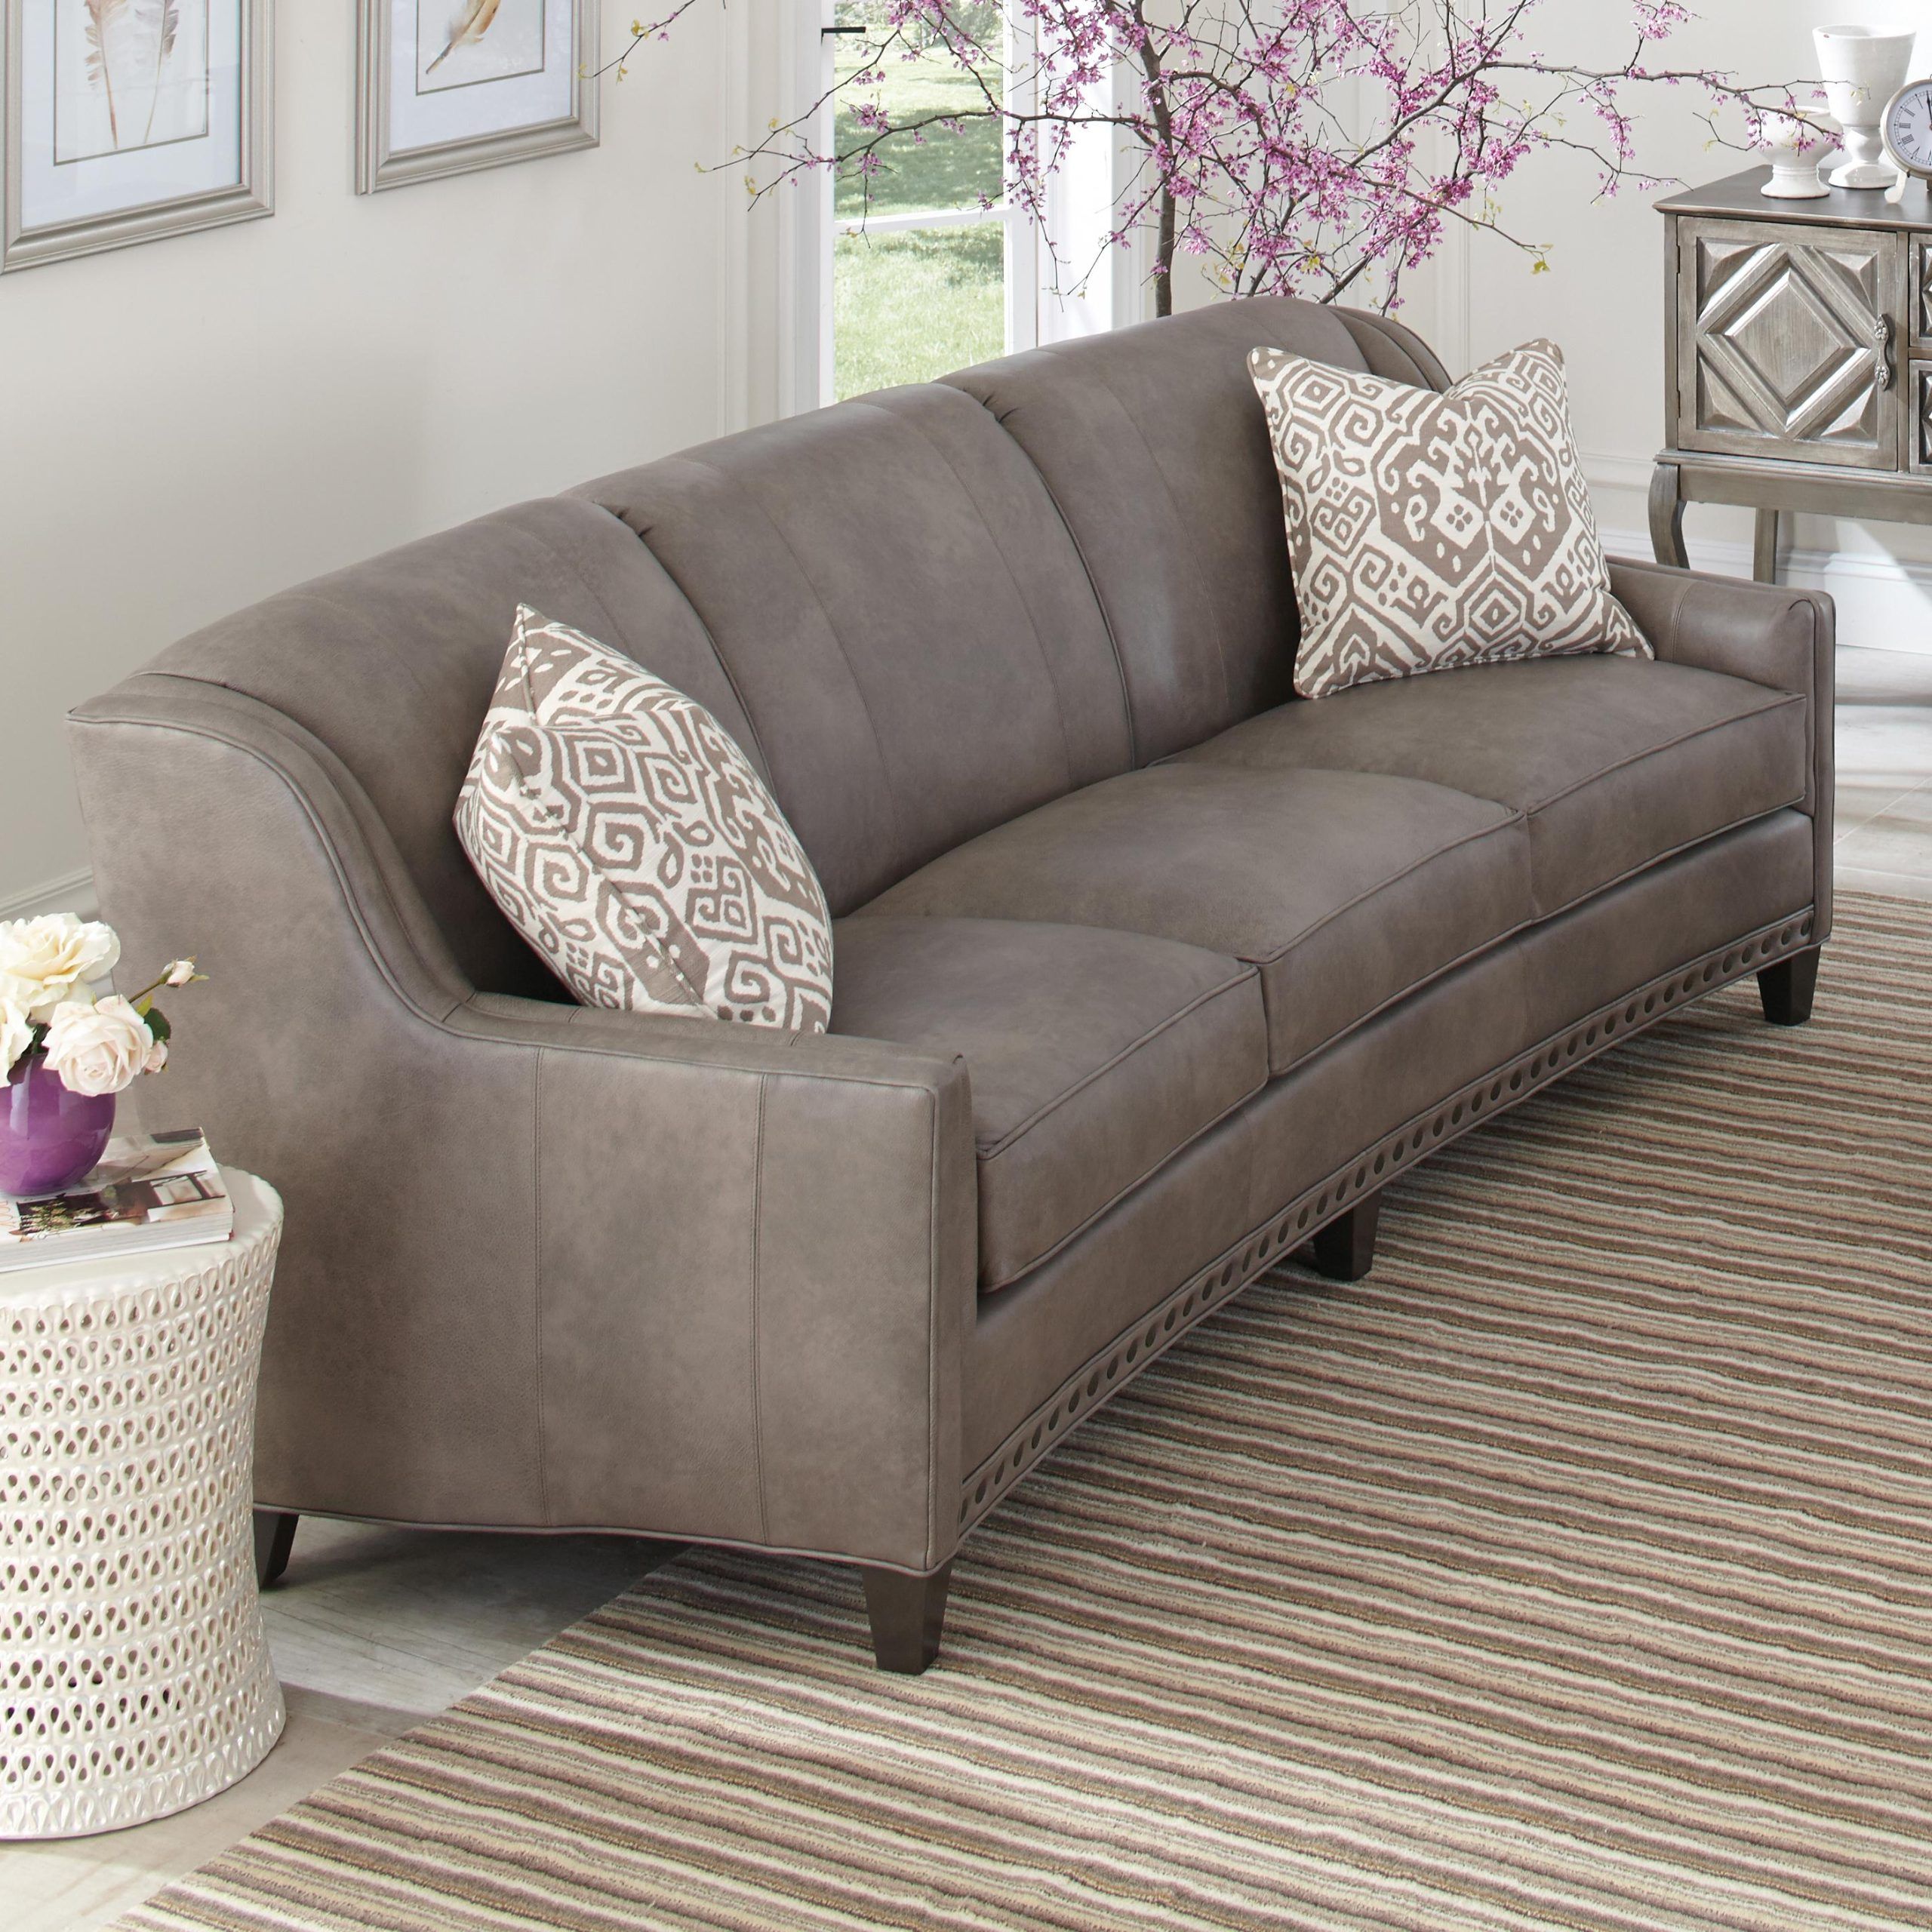 Trendy 227 Slightly Curved Sofa With Sloping Track Arms And Nail Head Trim Inside Sofas With Curved Arms (View 5 of 15)